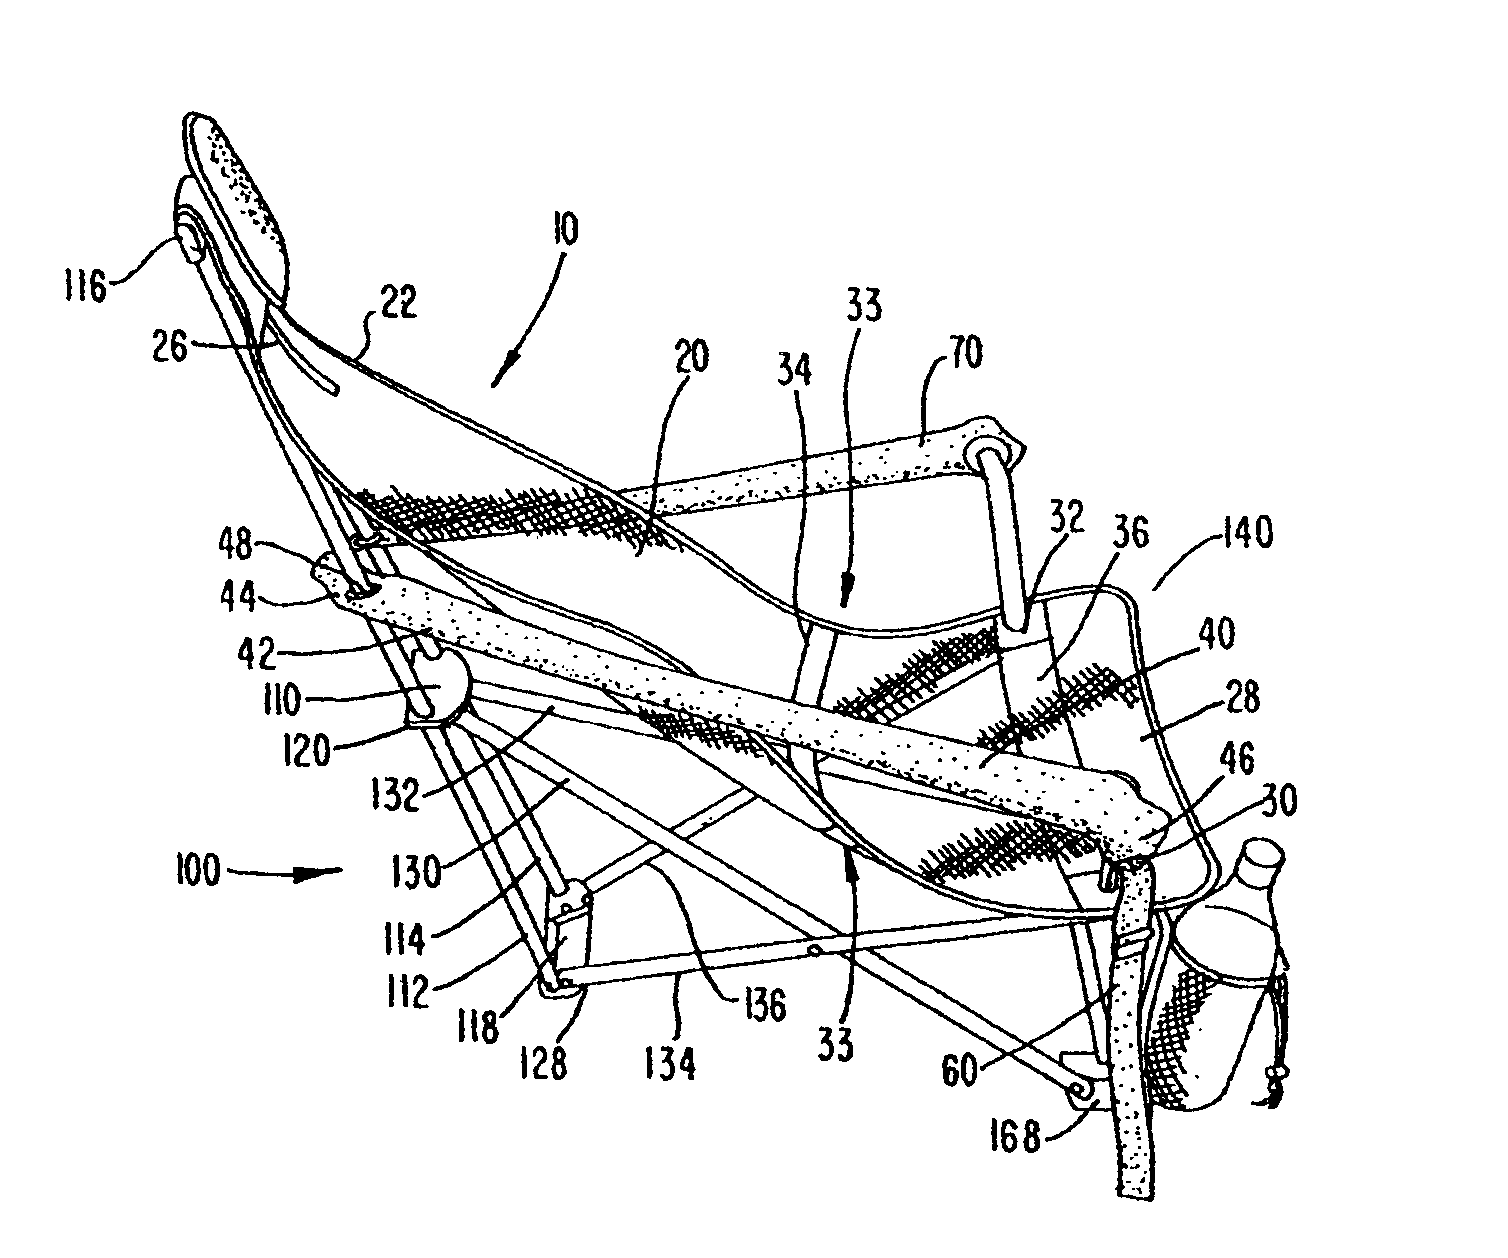 Collapsible support and methods of using the same